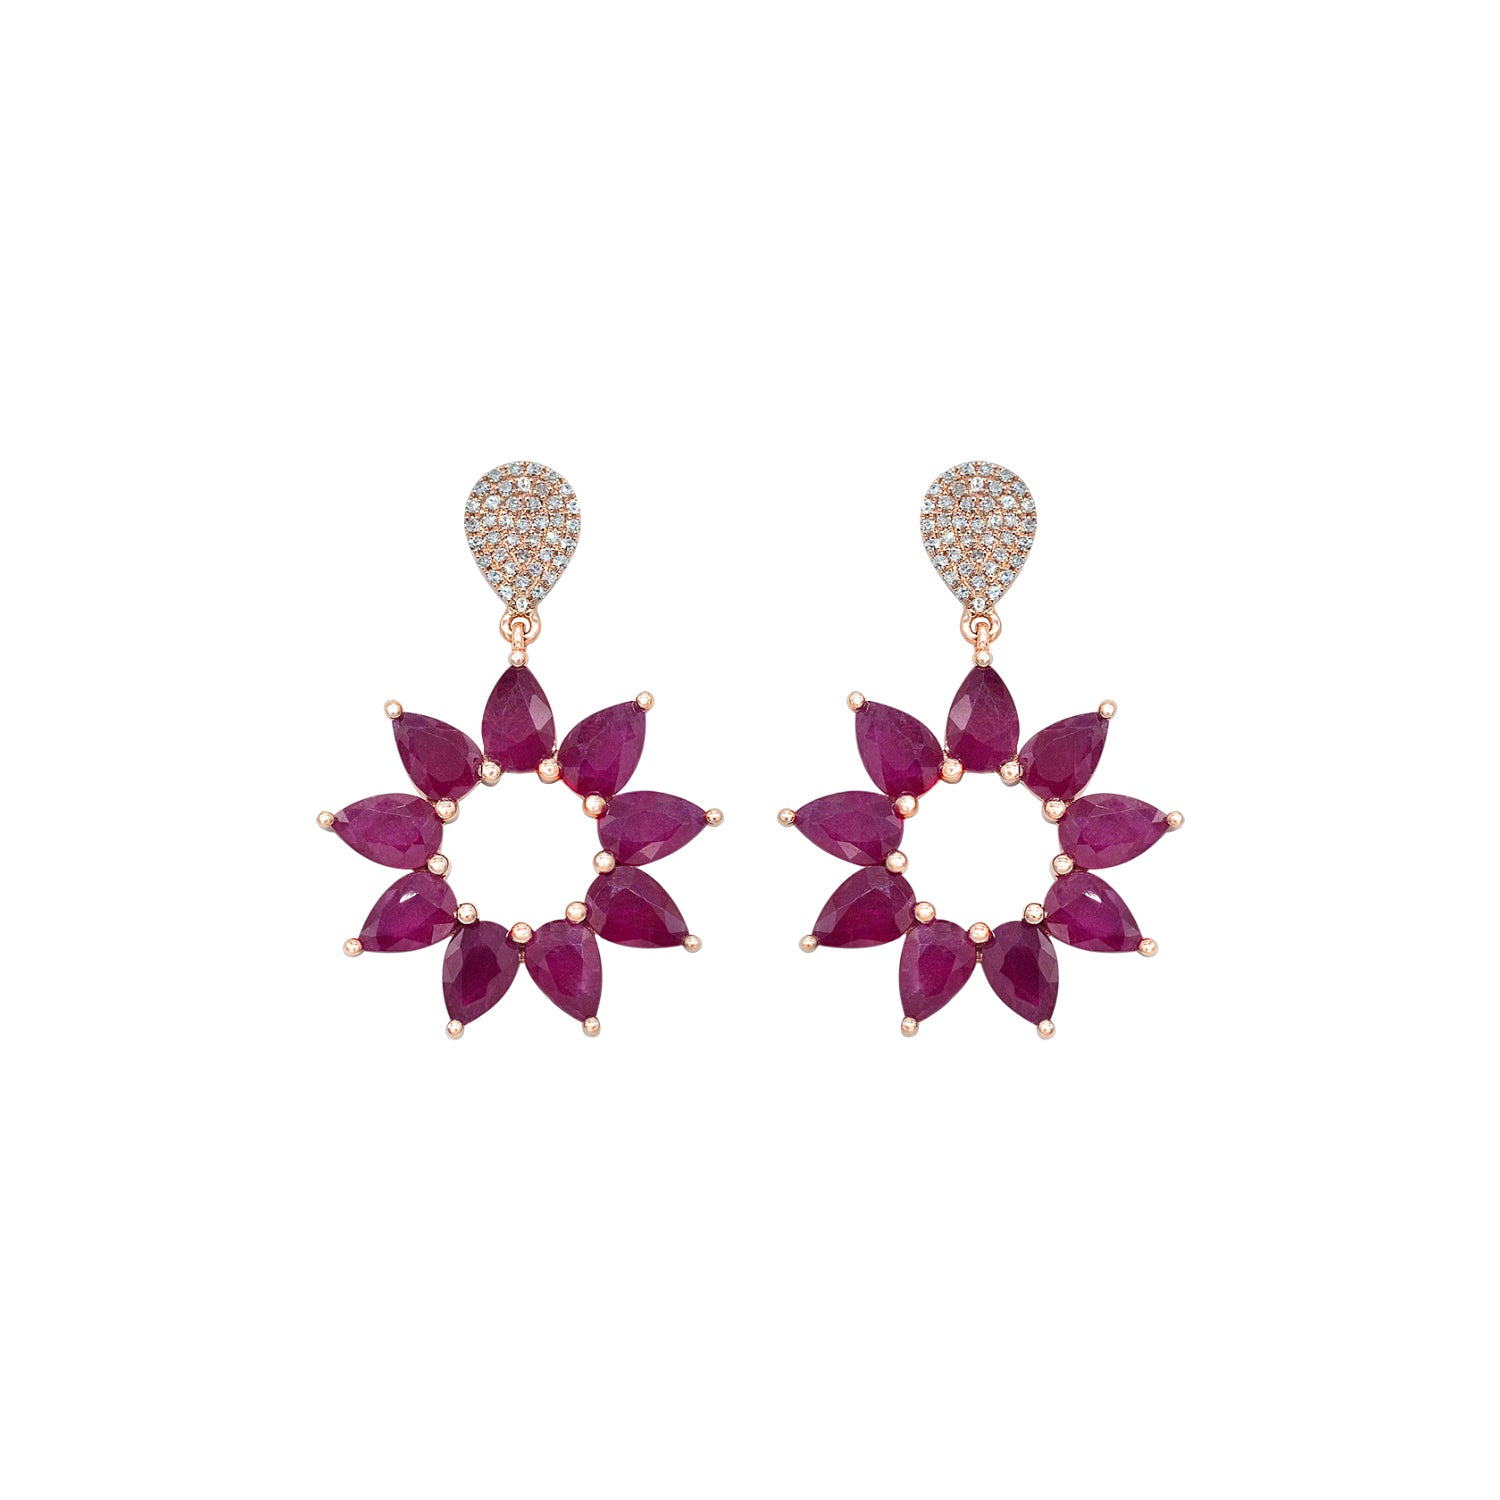 Diamond and Ruby Earring. Rose Gold Earring. 